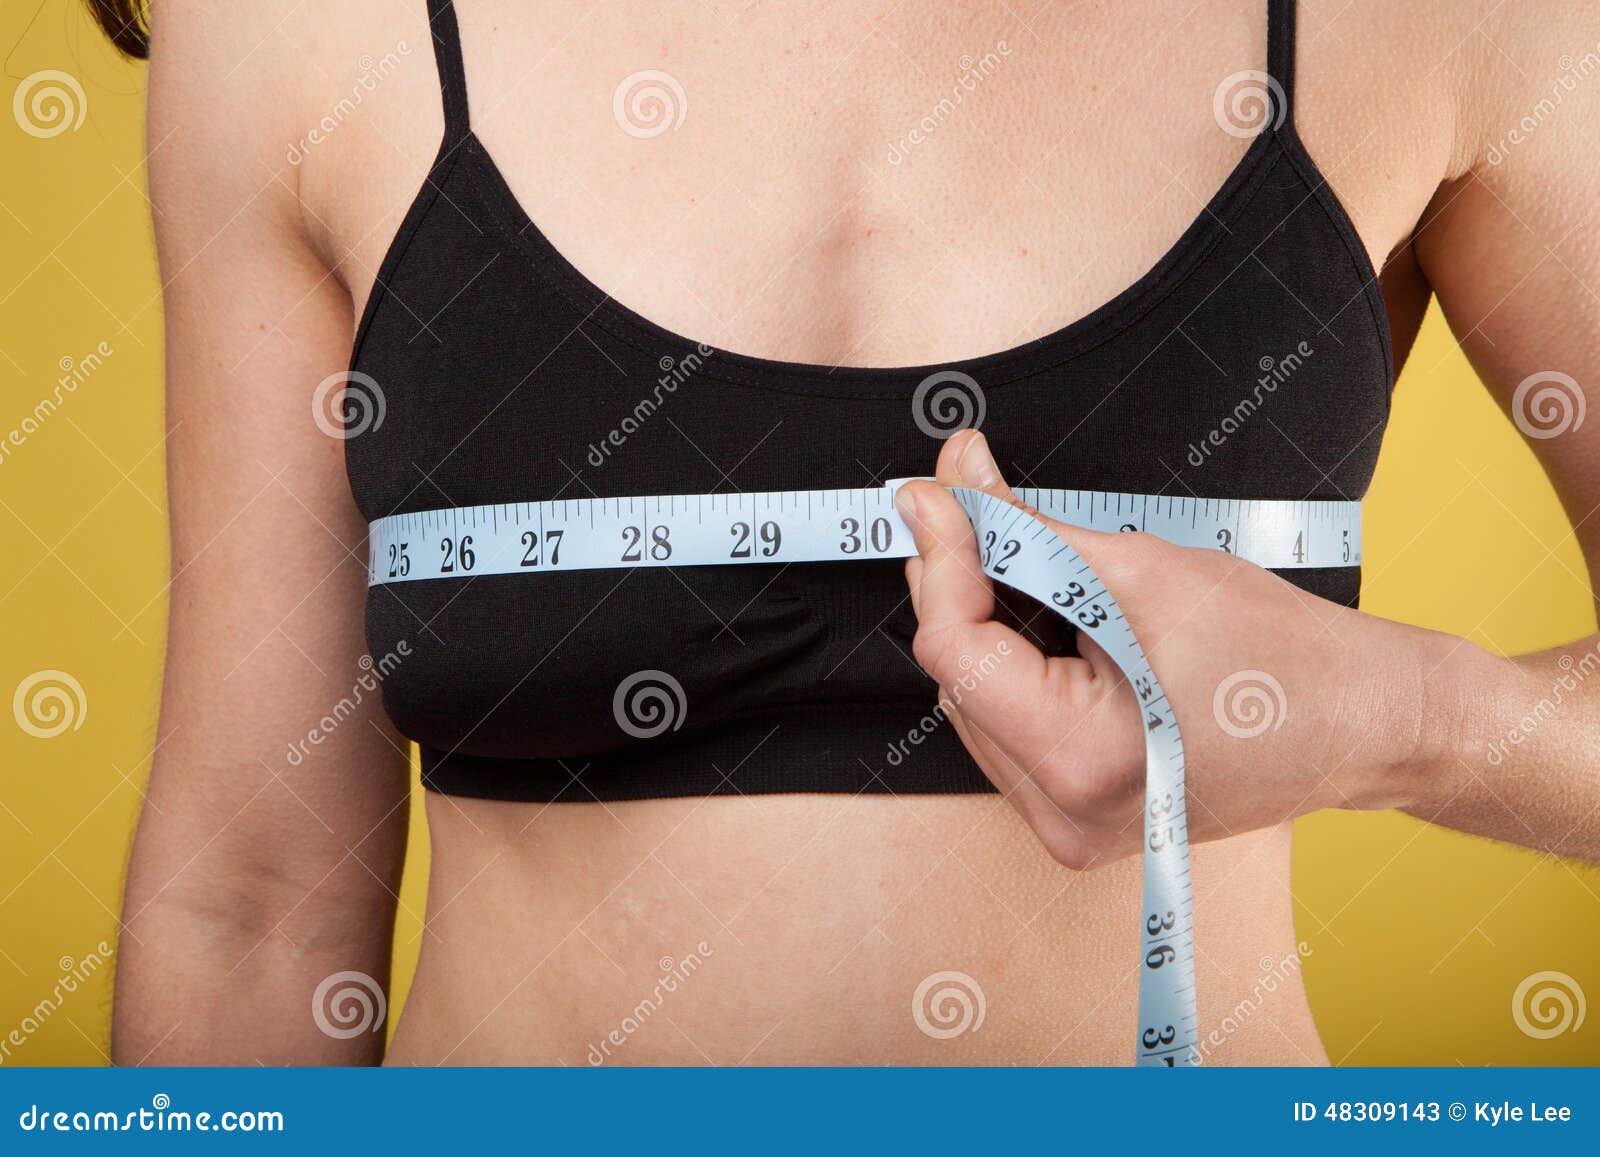 Bust measurement stock image. Image of female, beauty - 48309143